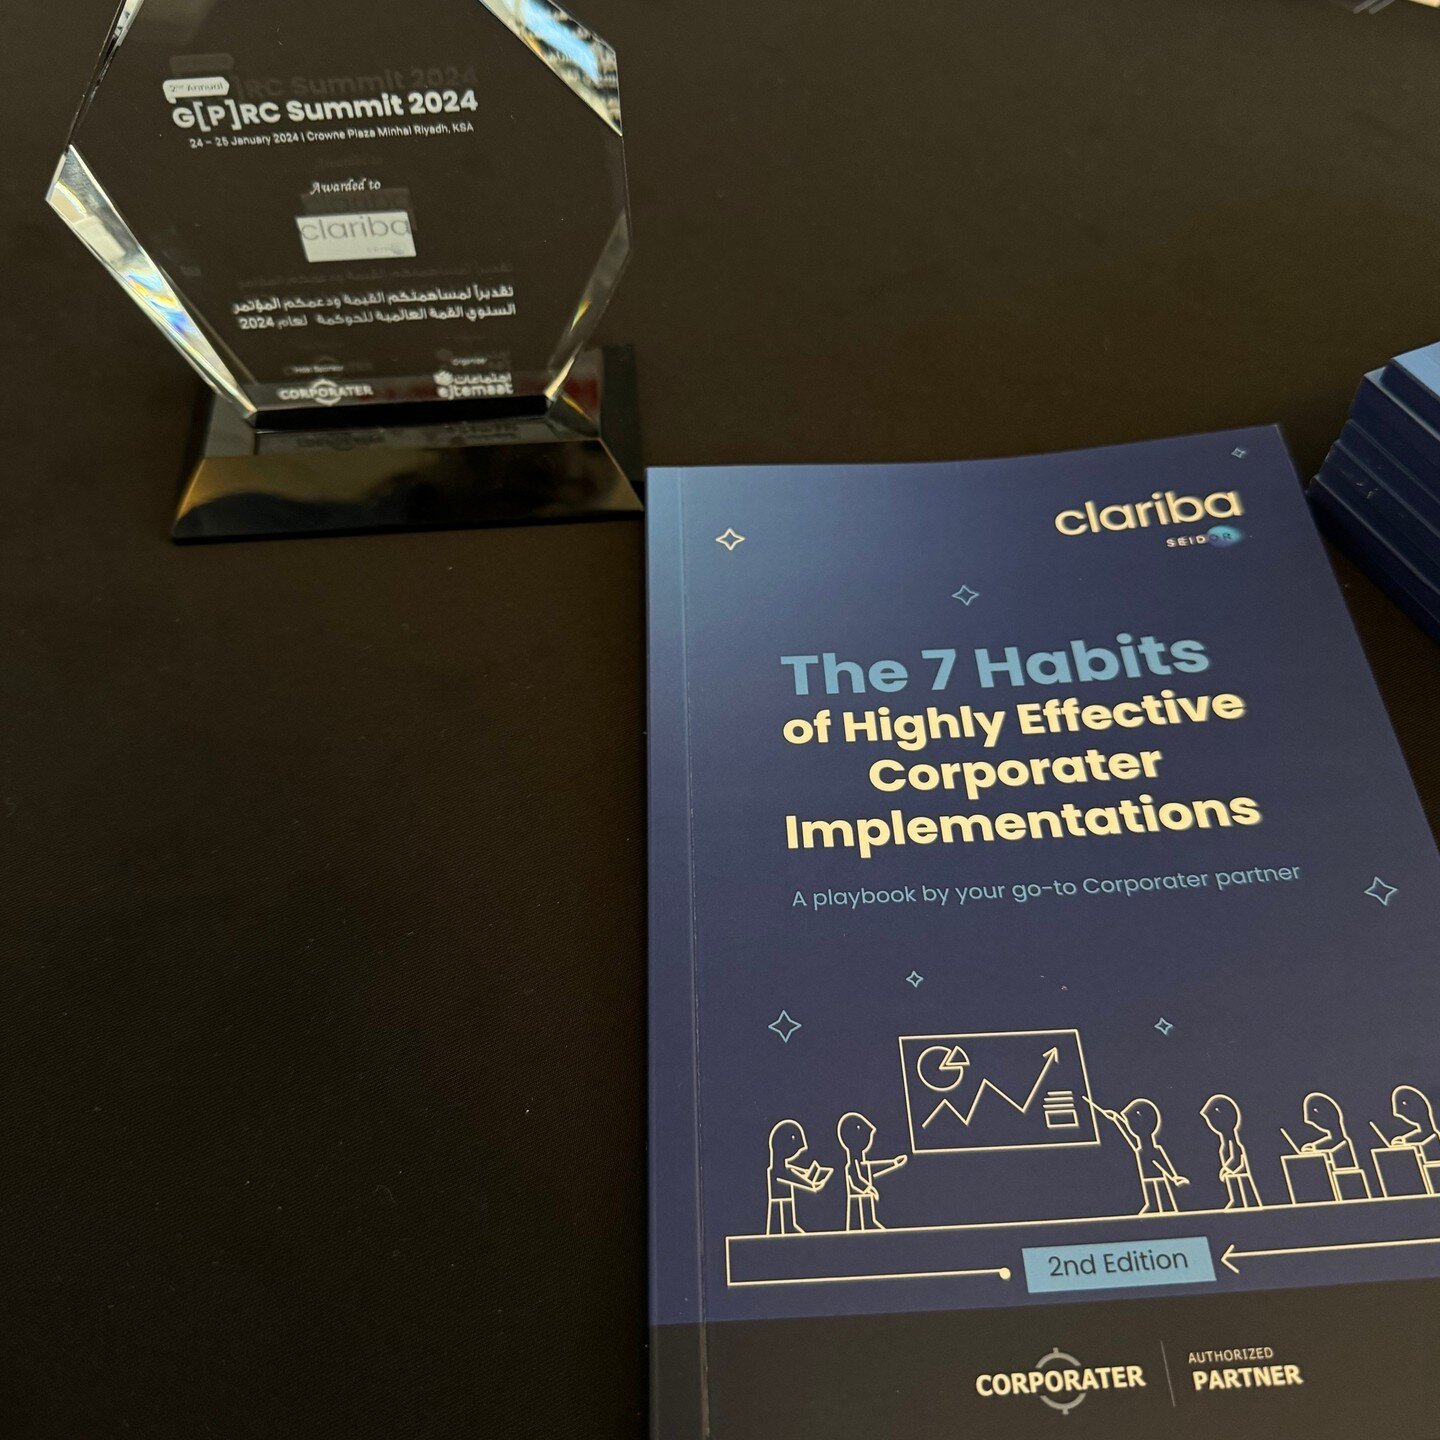 Ready to revolutionize your approach to #GPRC? 
📘 Discover the &quot;7 Habits of Highly Effective Corporater Implementations&quot; &ndash; a game-changer brought to you by #ClaribaSEIDOR. 
Don't miss out on this transformative guide!
💡 Download it 